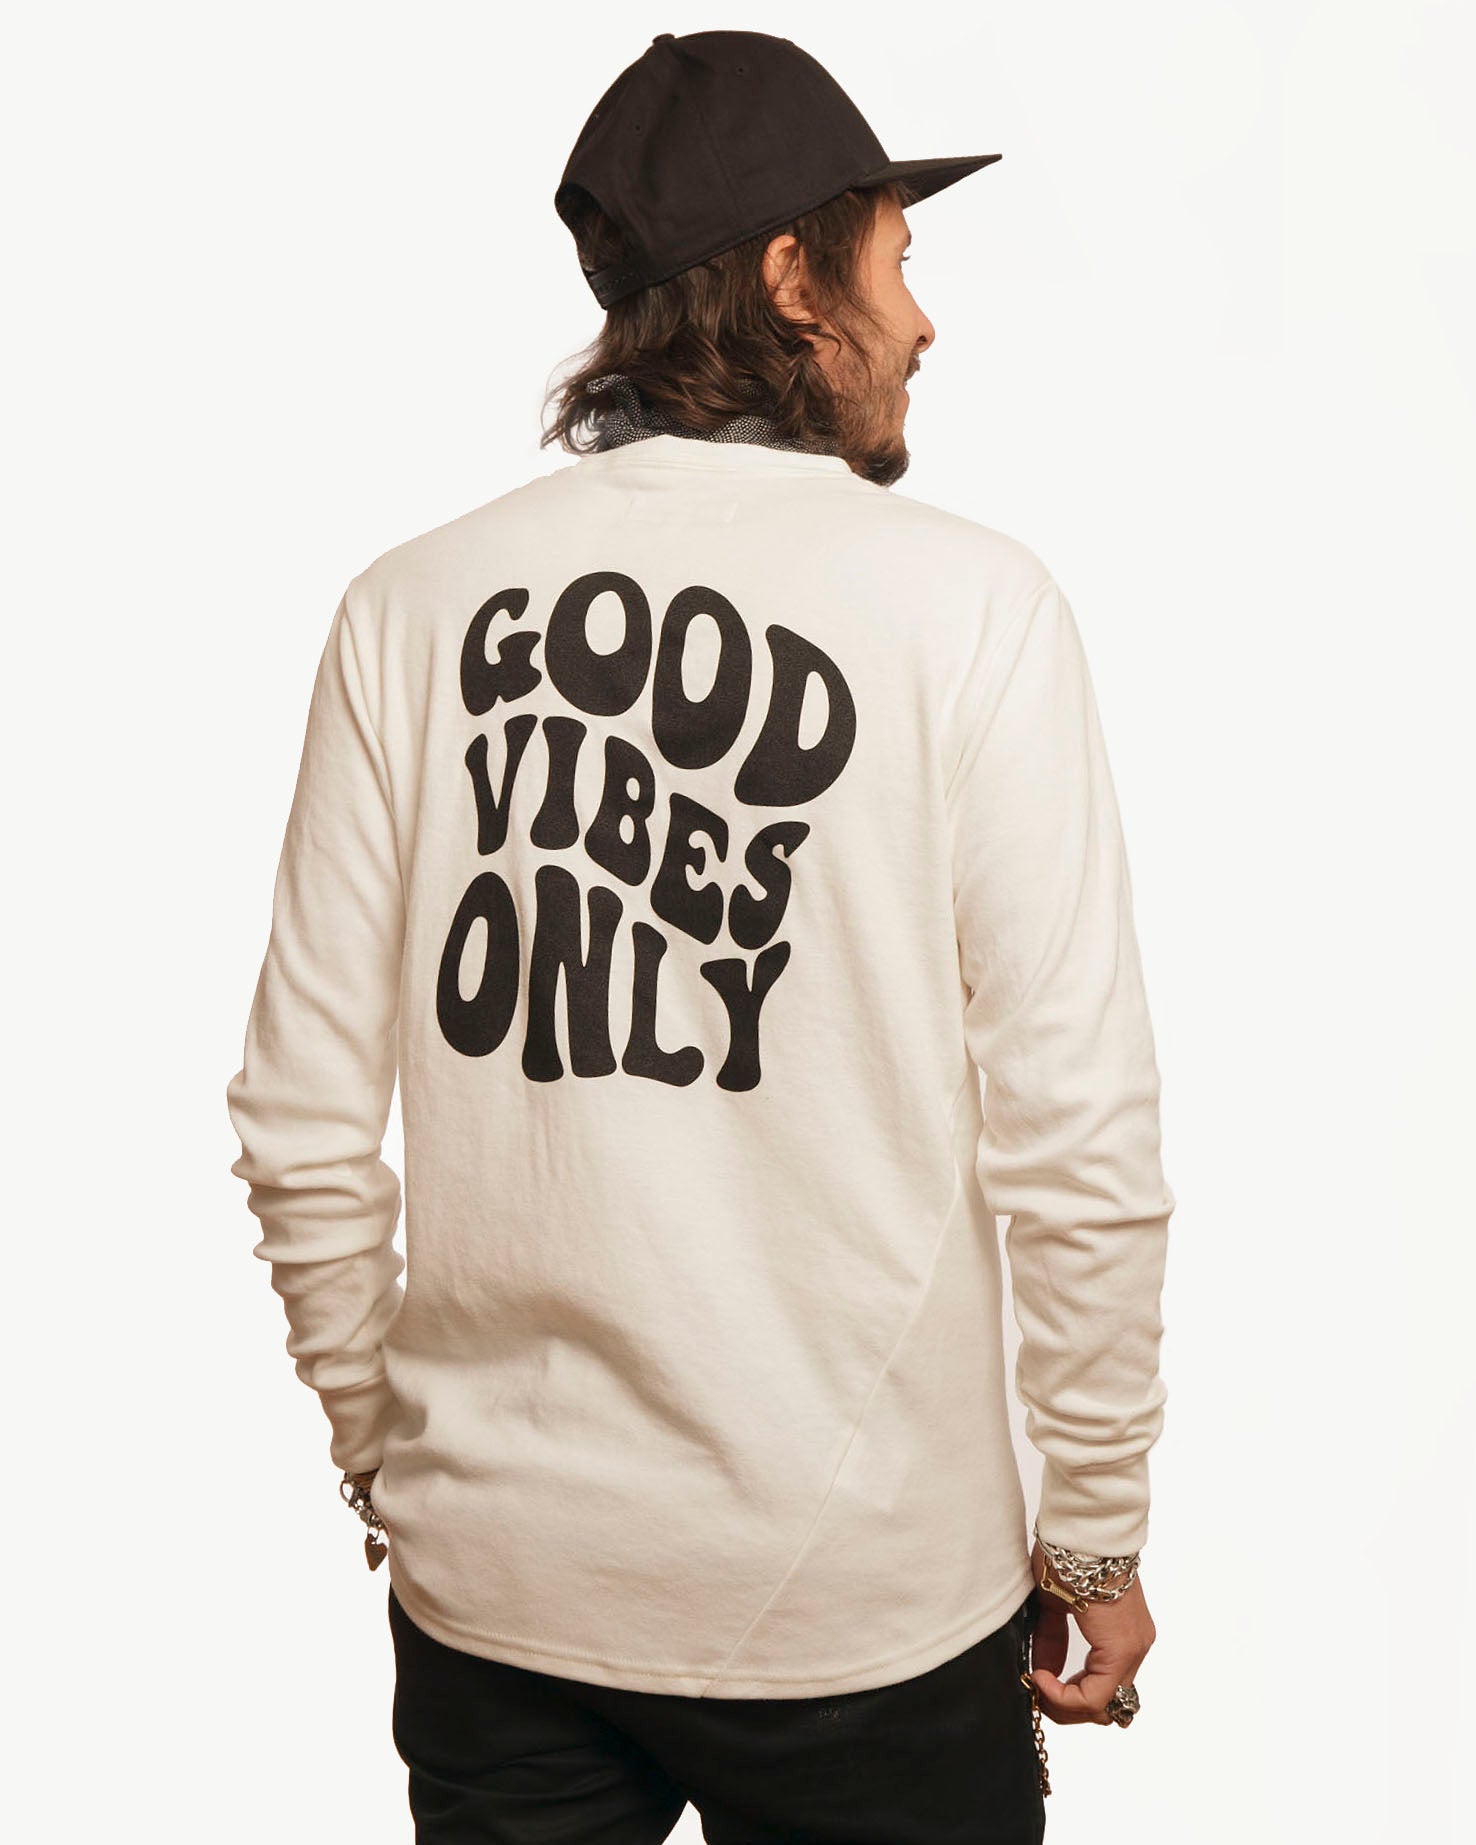 Graphic T-Shirt | Good Vibes Only | Natural